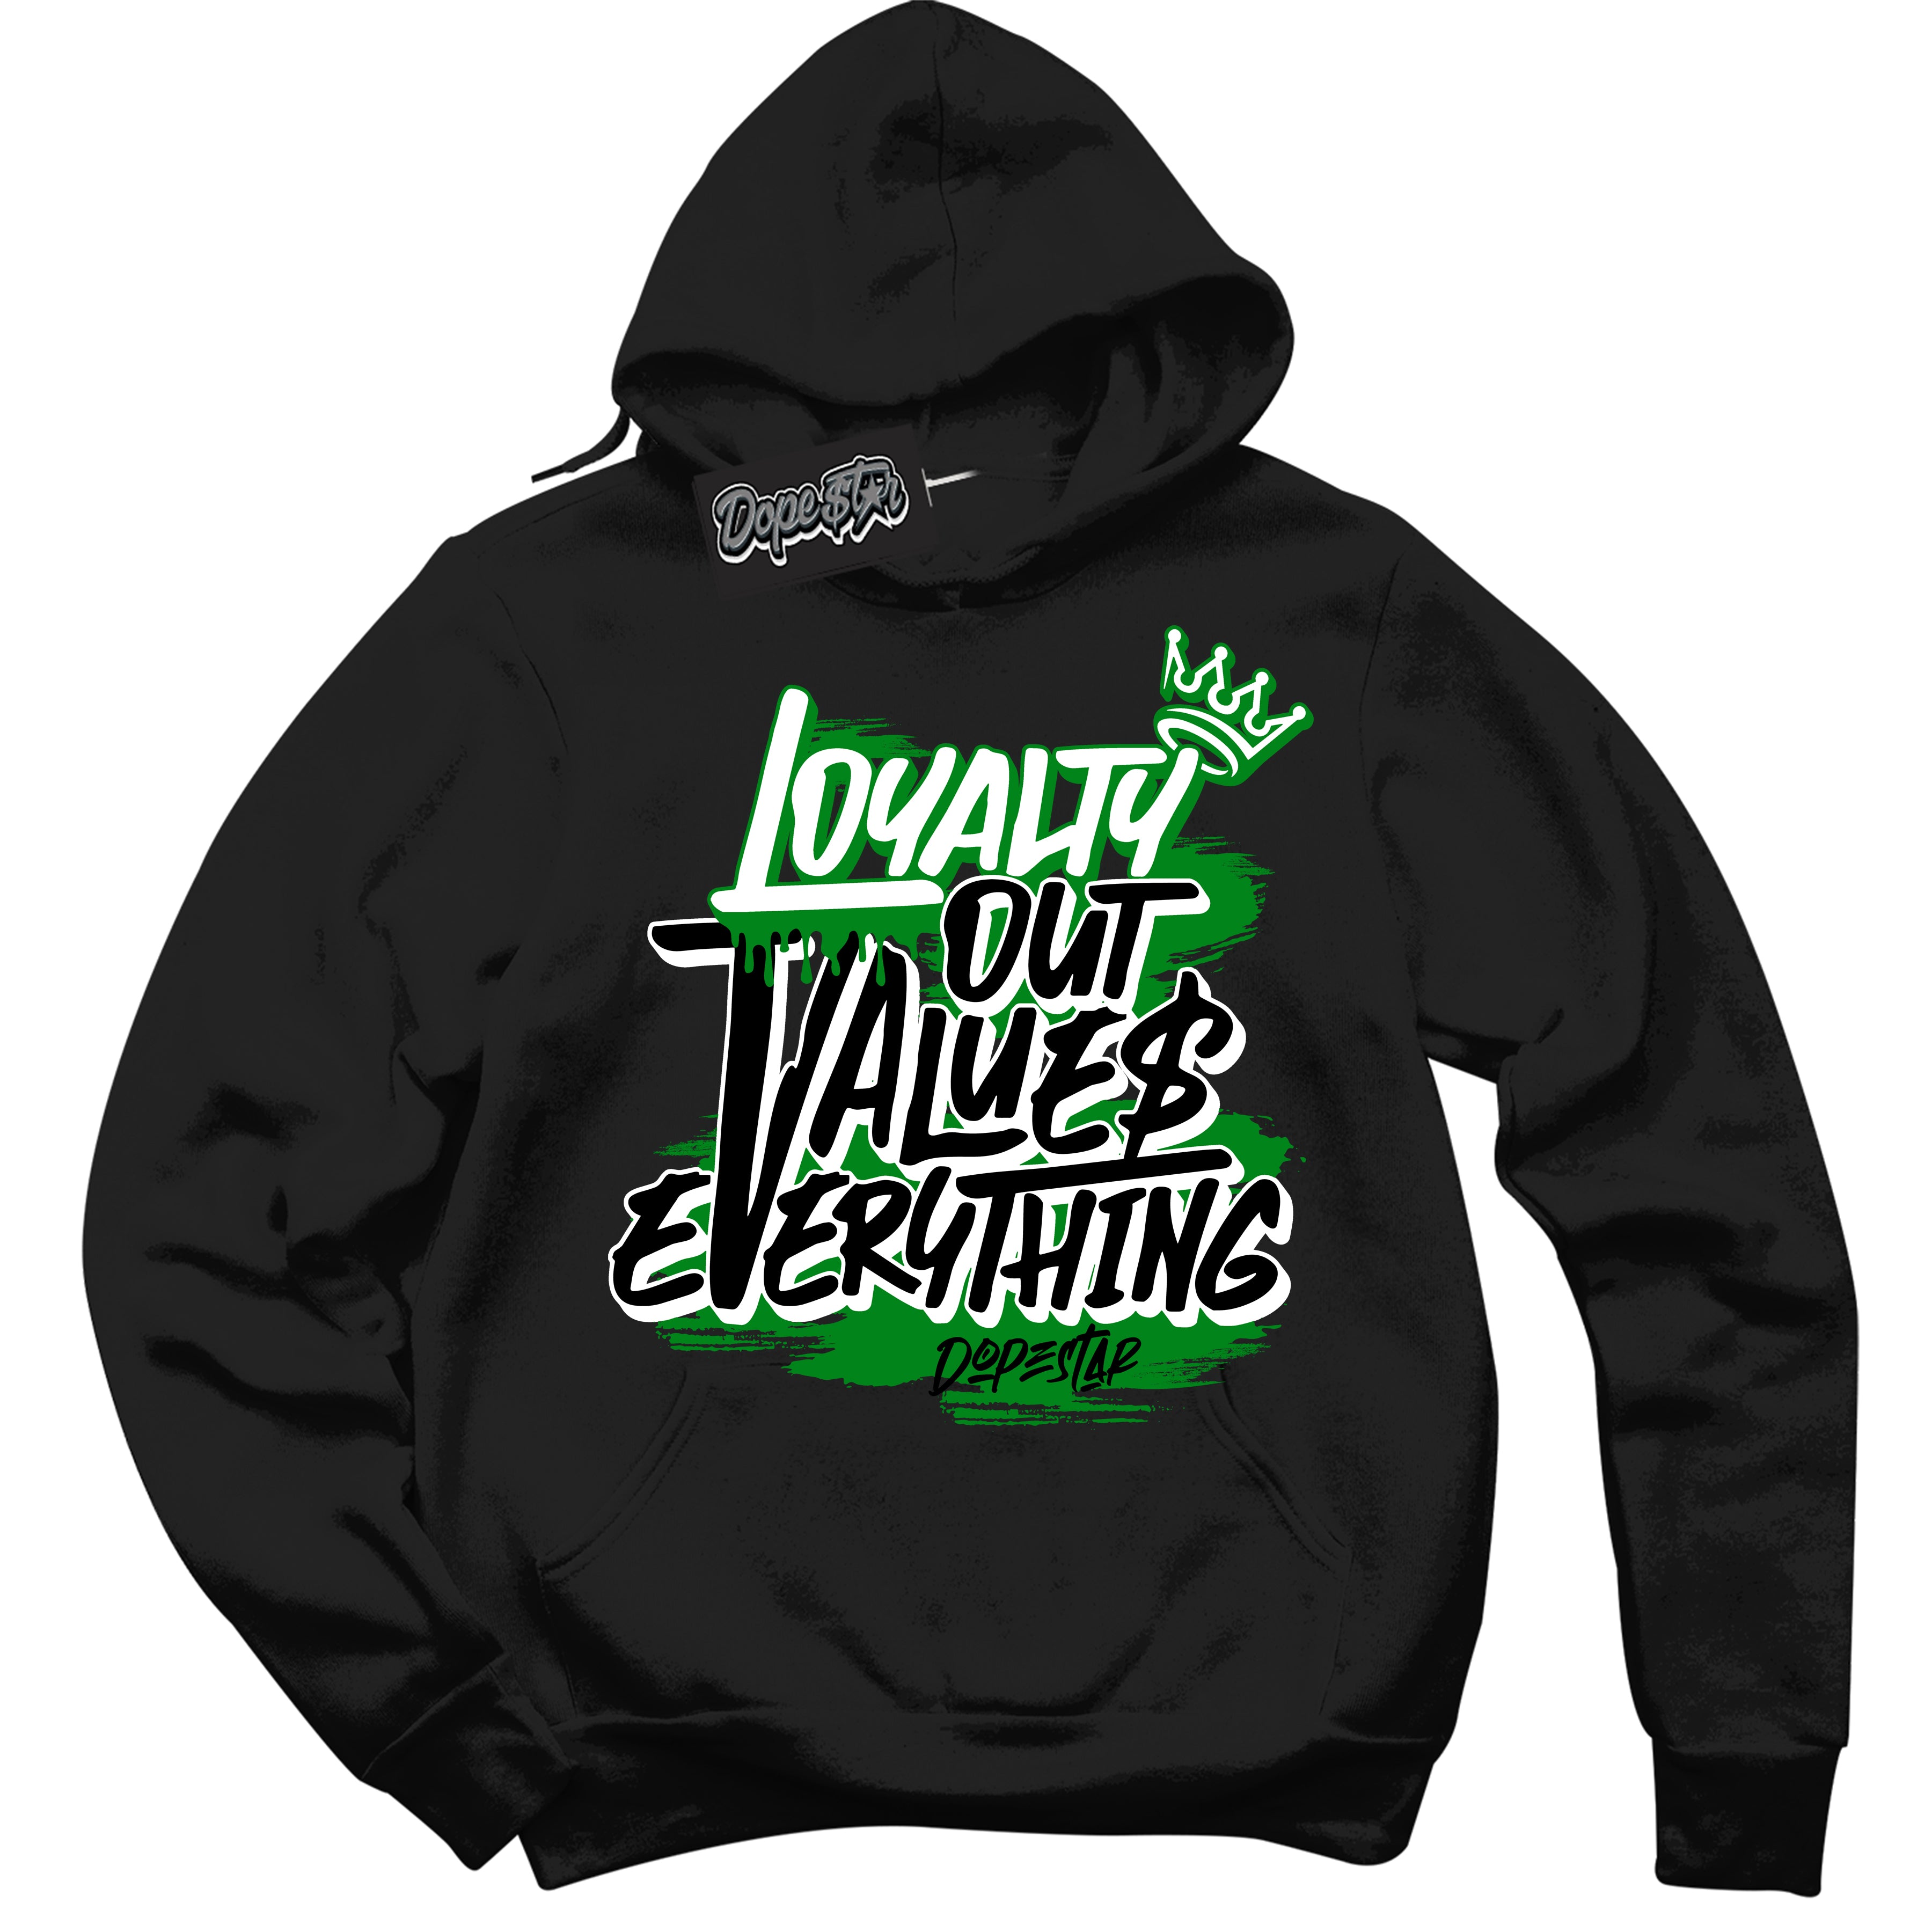 Cool Black Hoodie with “ Loyalty Out Values Everything ”  design that Perfectly Matches  OG Lucky Green 1s Sneakers.